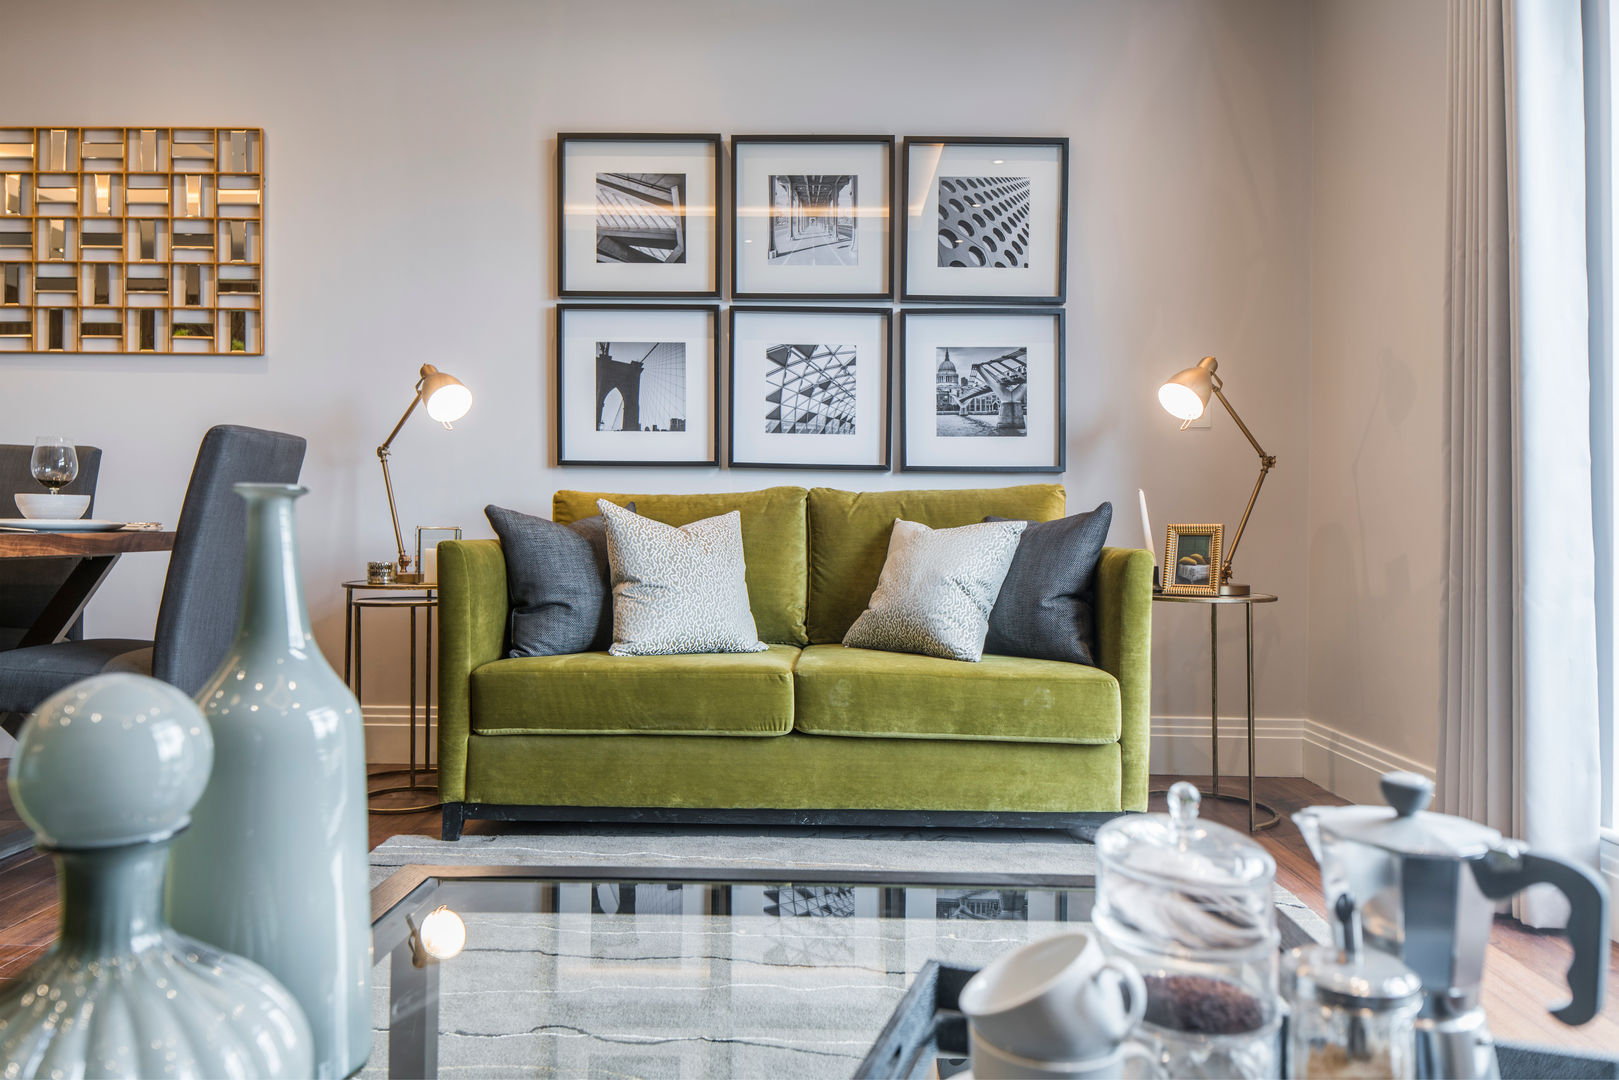 Musewll Hill, London Jigsaw Interior Architecture & Design Living room کاپر / کانسی / پیتل green sofa,velvet,luxury,london,jigsaw interiors,modern,copper,picture wall,open-plan